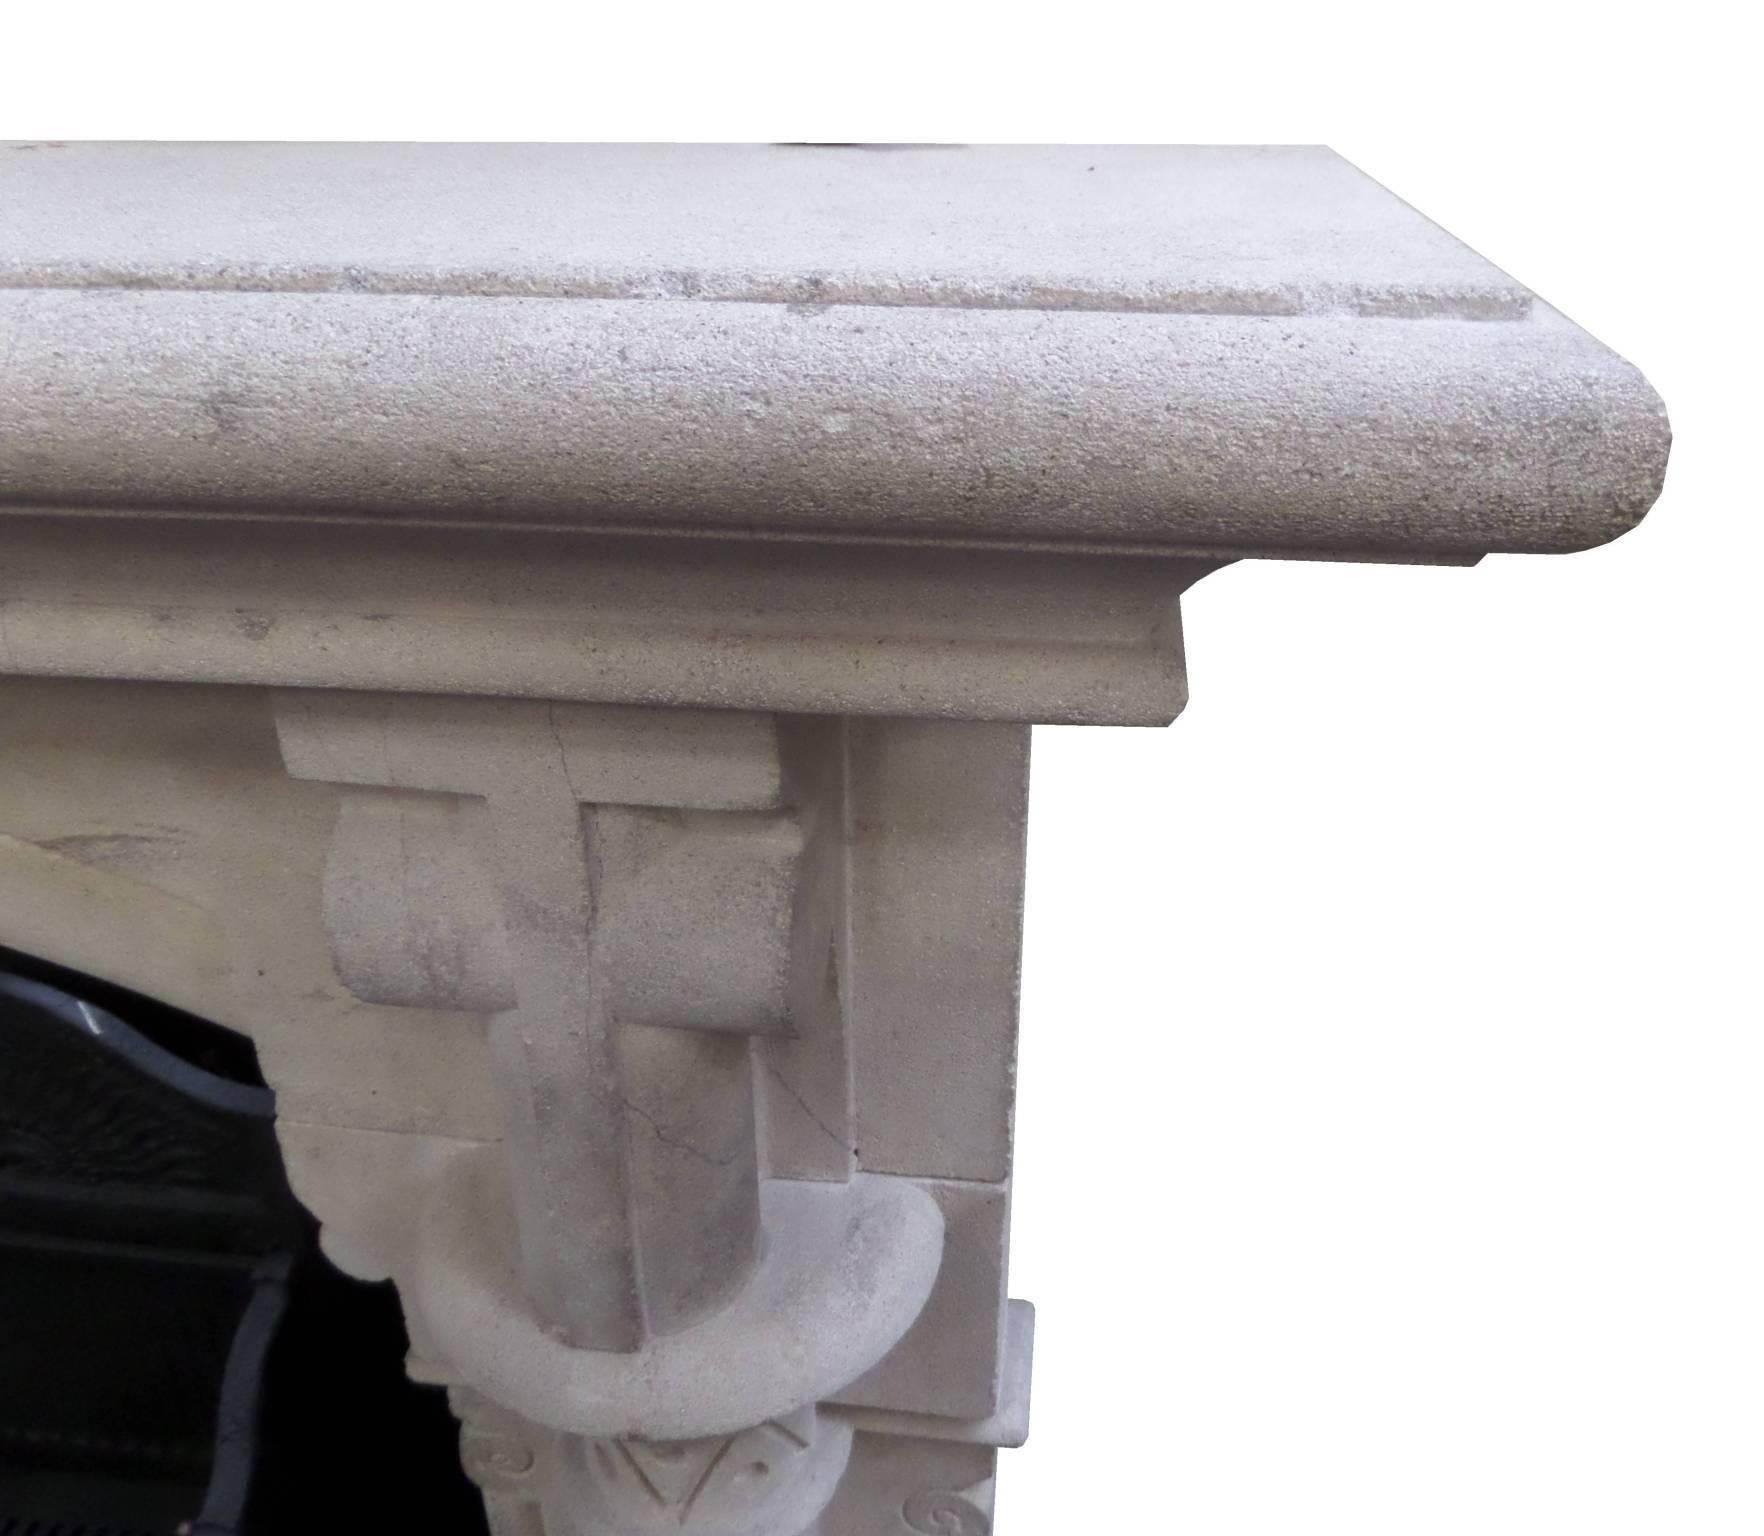 Antique restored Victorian stone fire surround with a large mantel supported by two pillars with bold Gothic features, circa 1850 from a vicarage in Leicestershire.